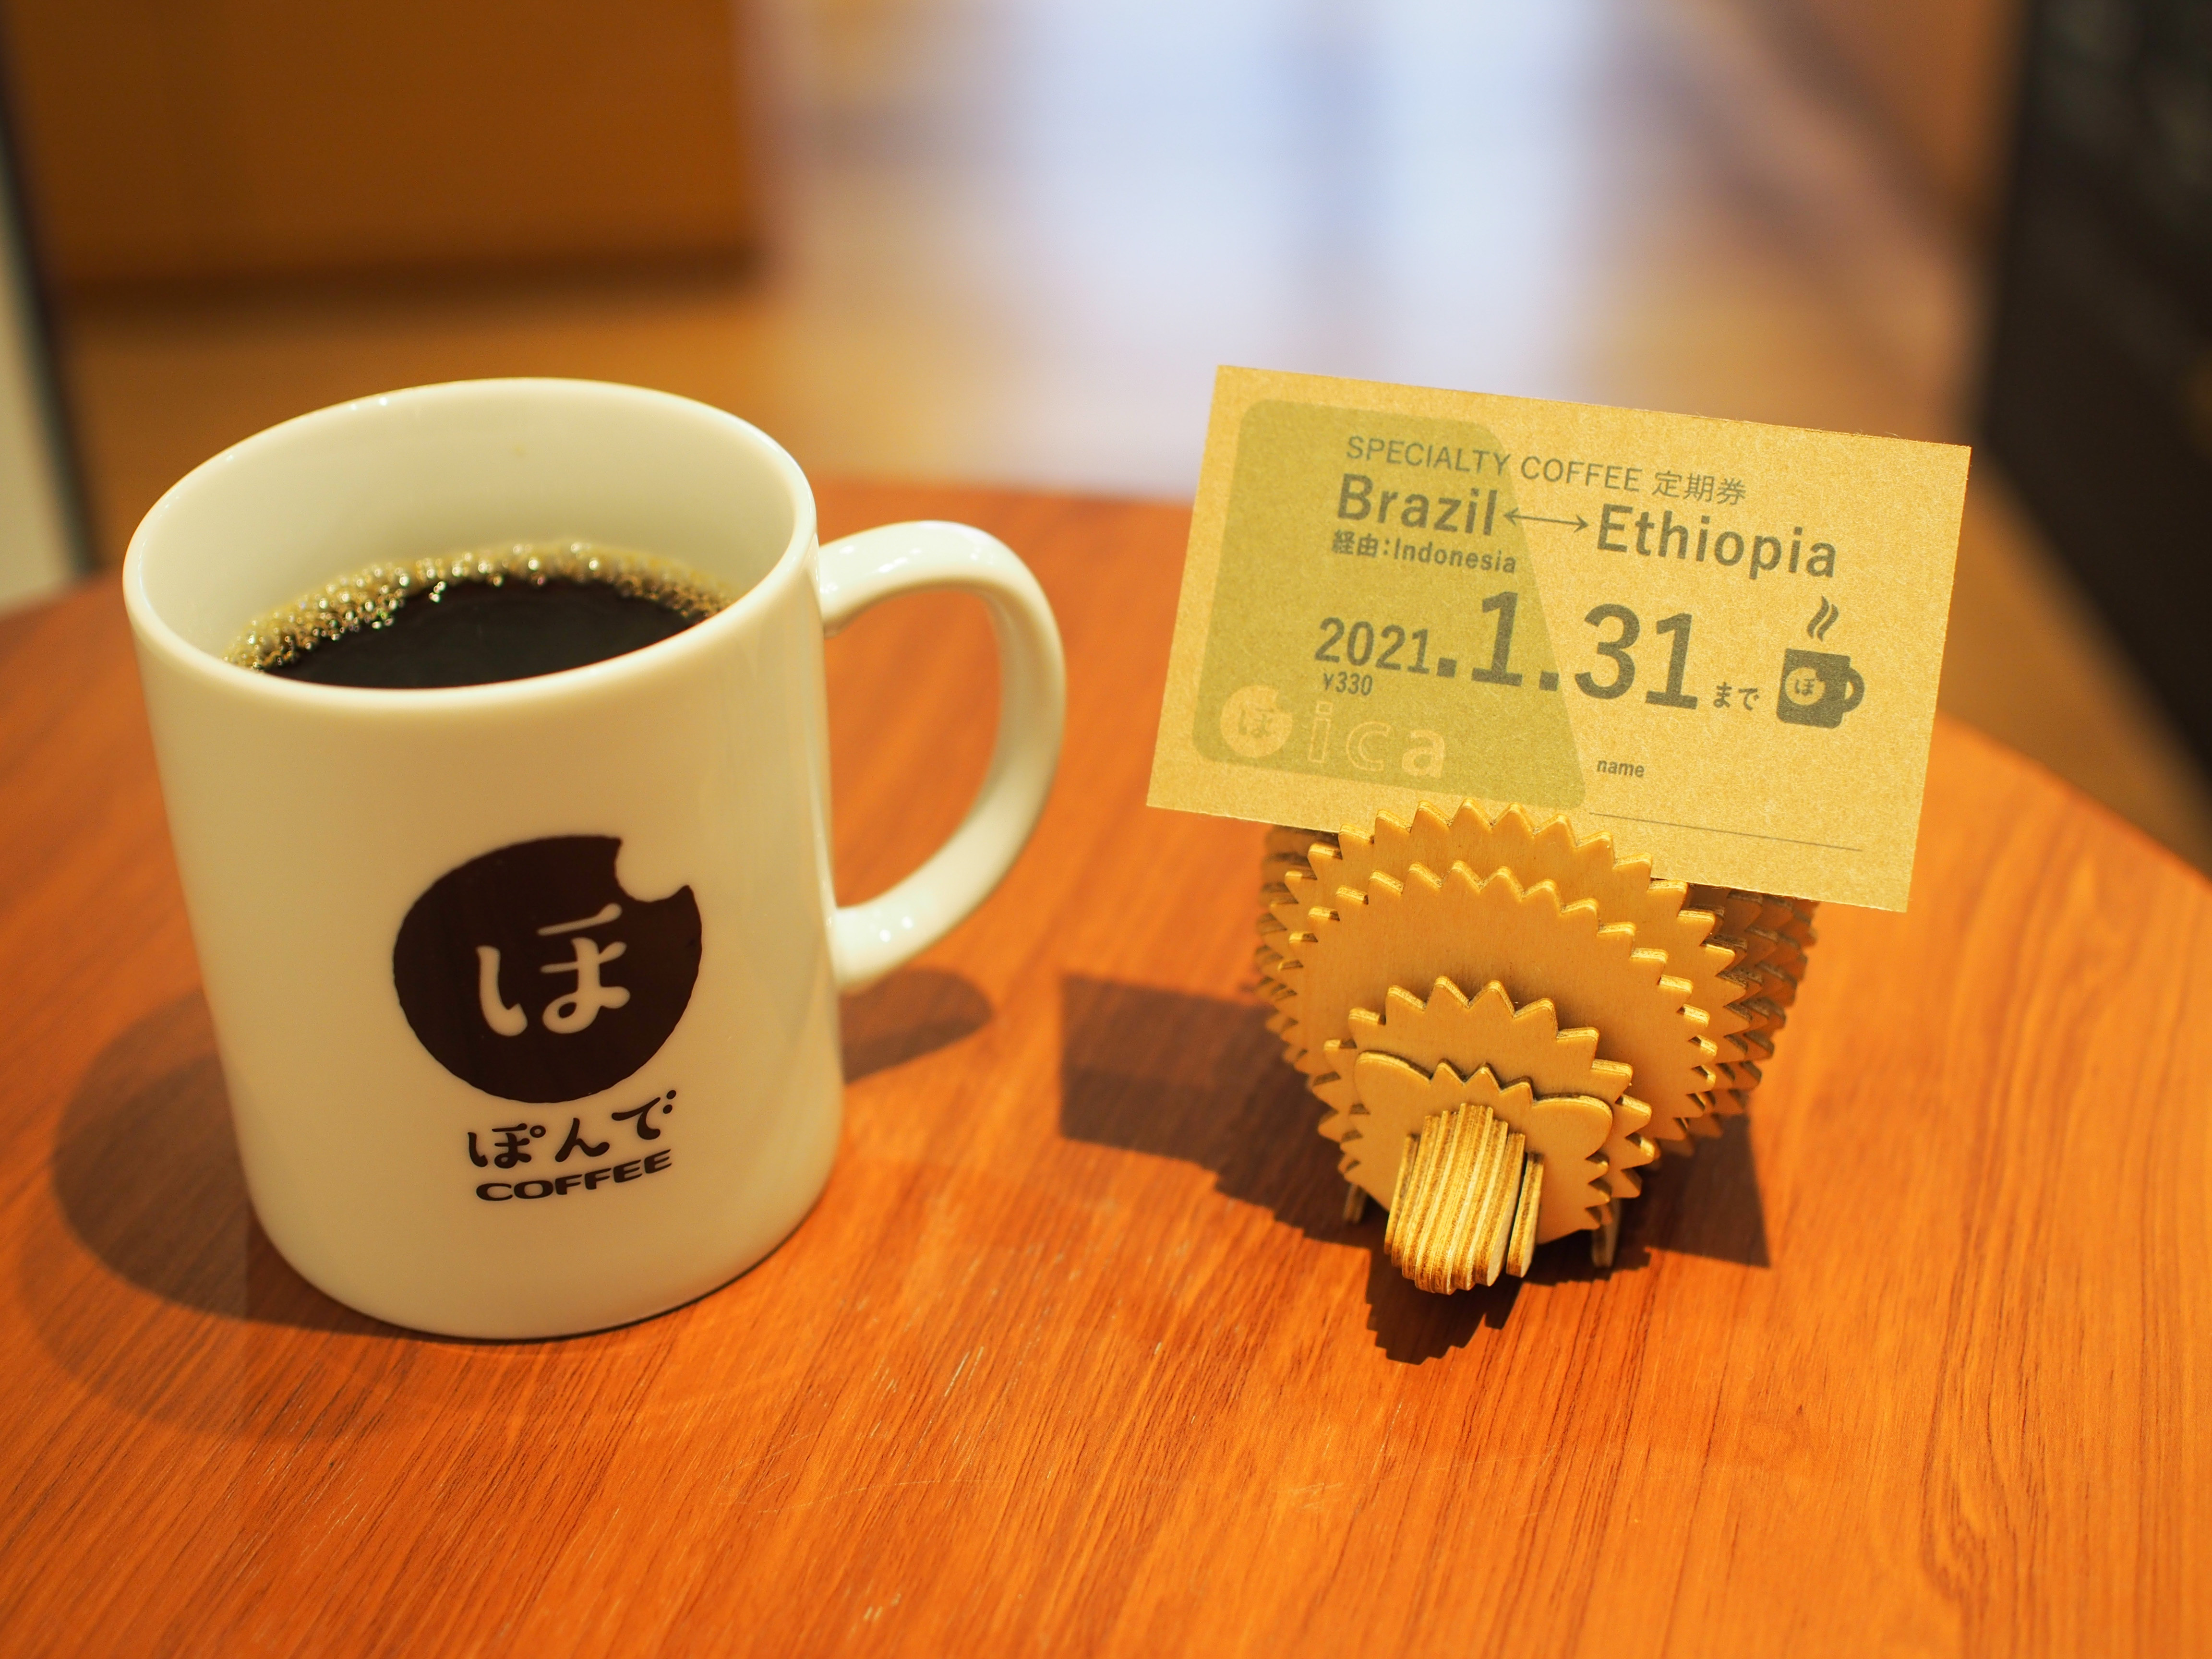 『Specialty Coffee 定期券』販売します！